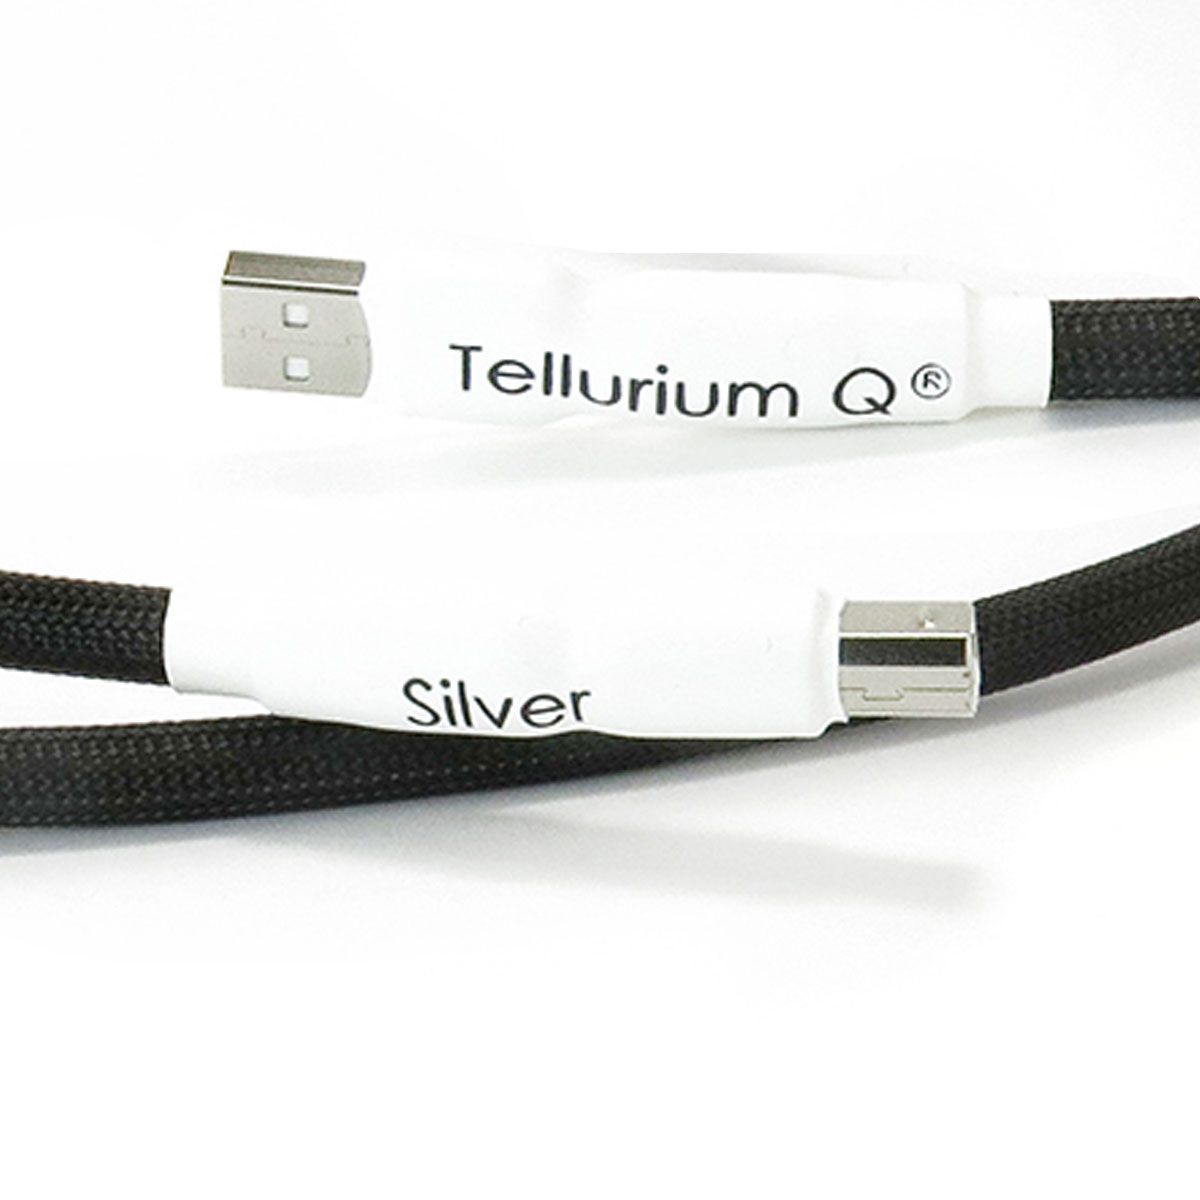 Tellurium Q Silver USB Type A to Type B Cable